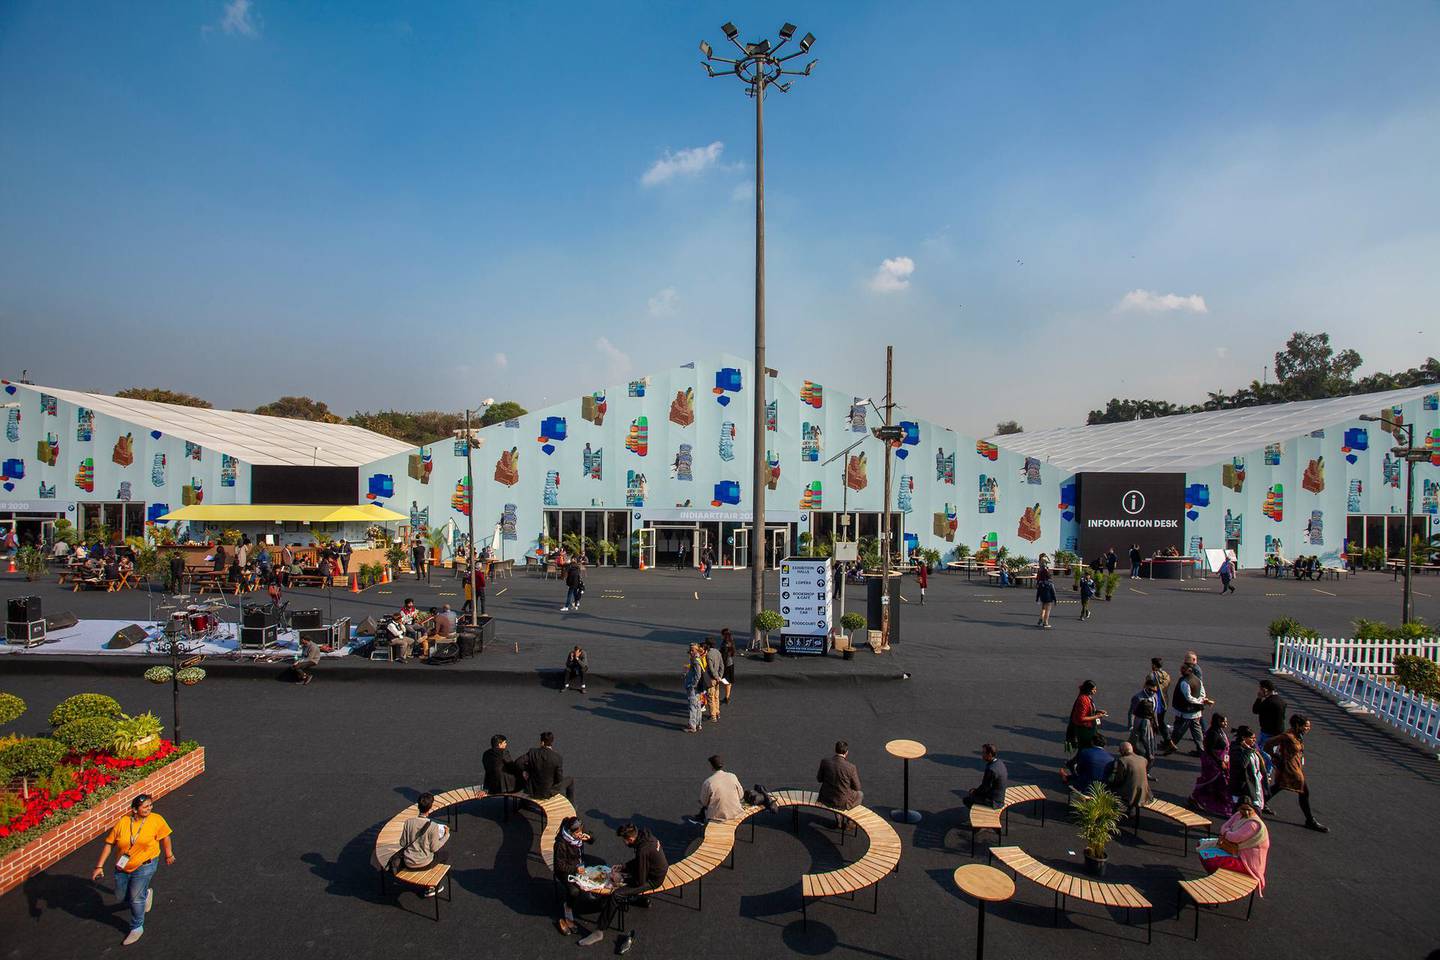 On the grounds of India Art Fair, where Sameer Kulavoor's work has been used as the facade design. Courtesy India Art Fair 2020